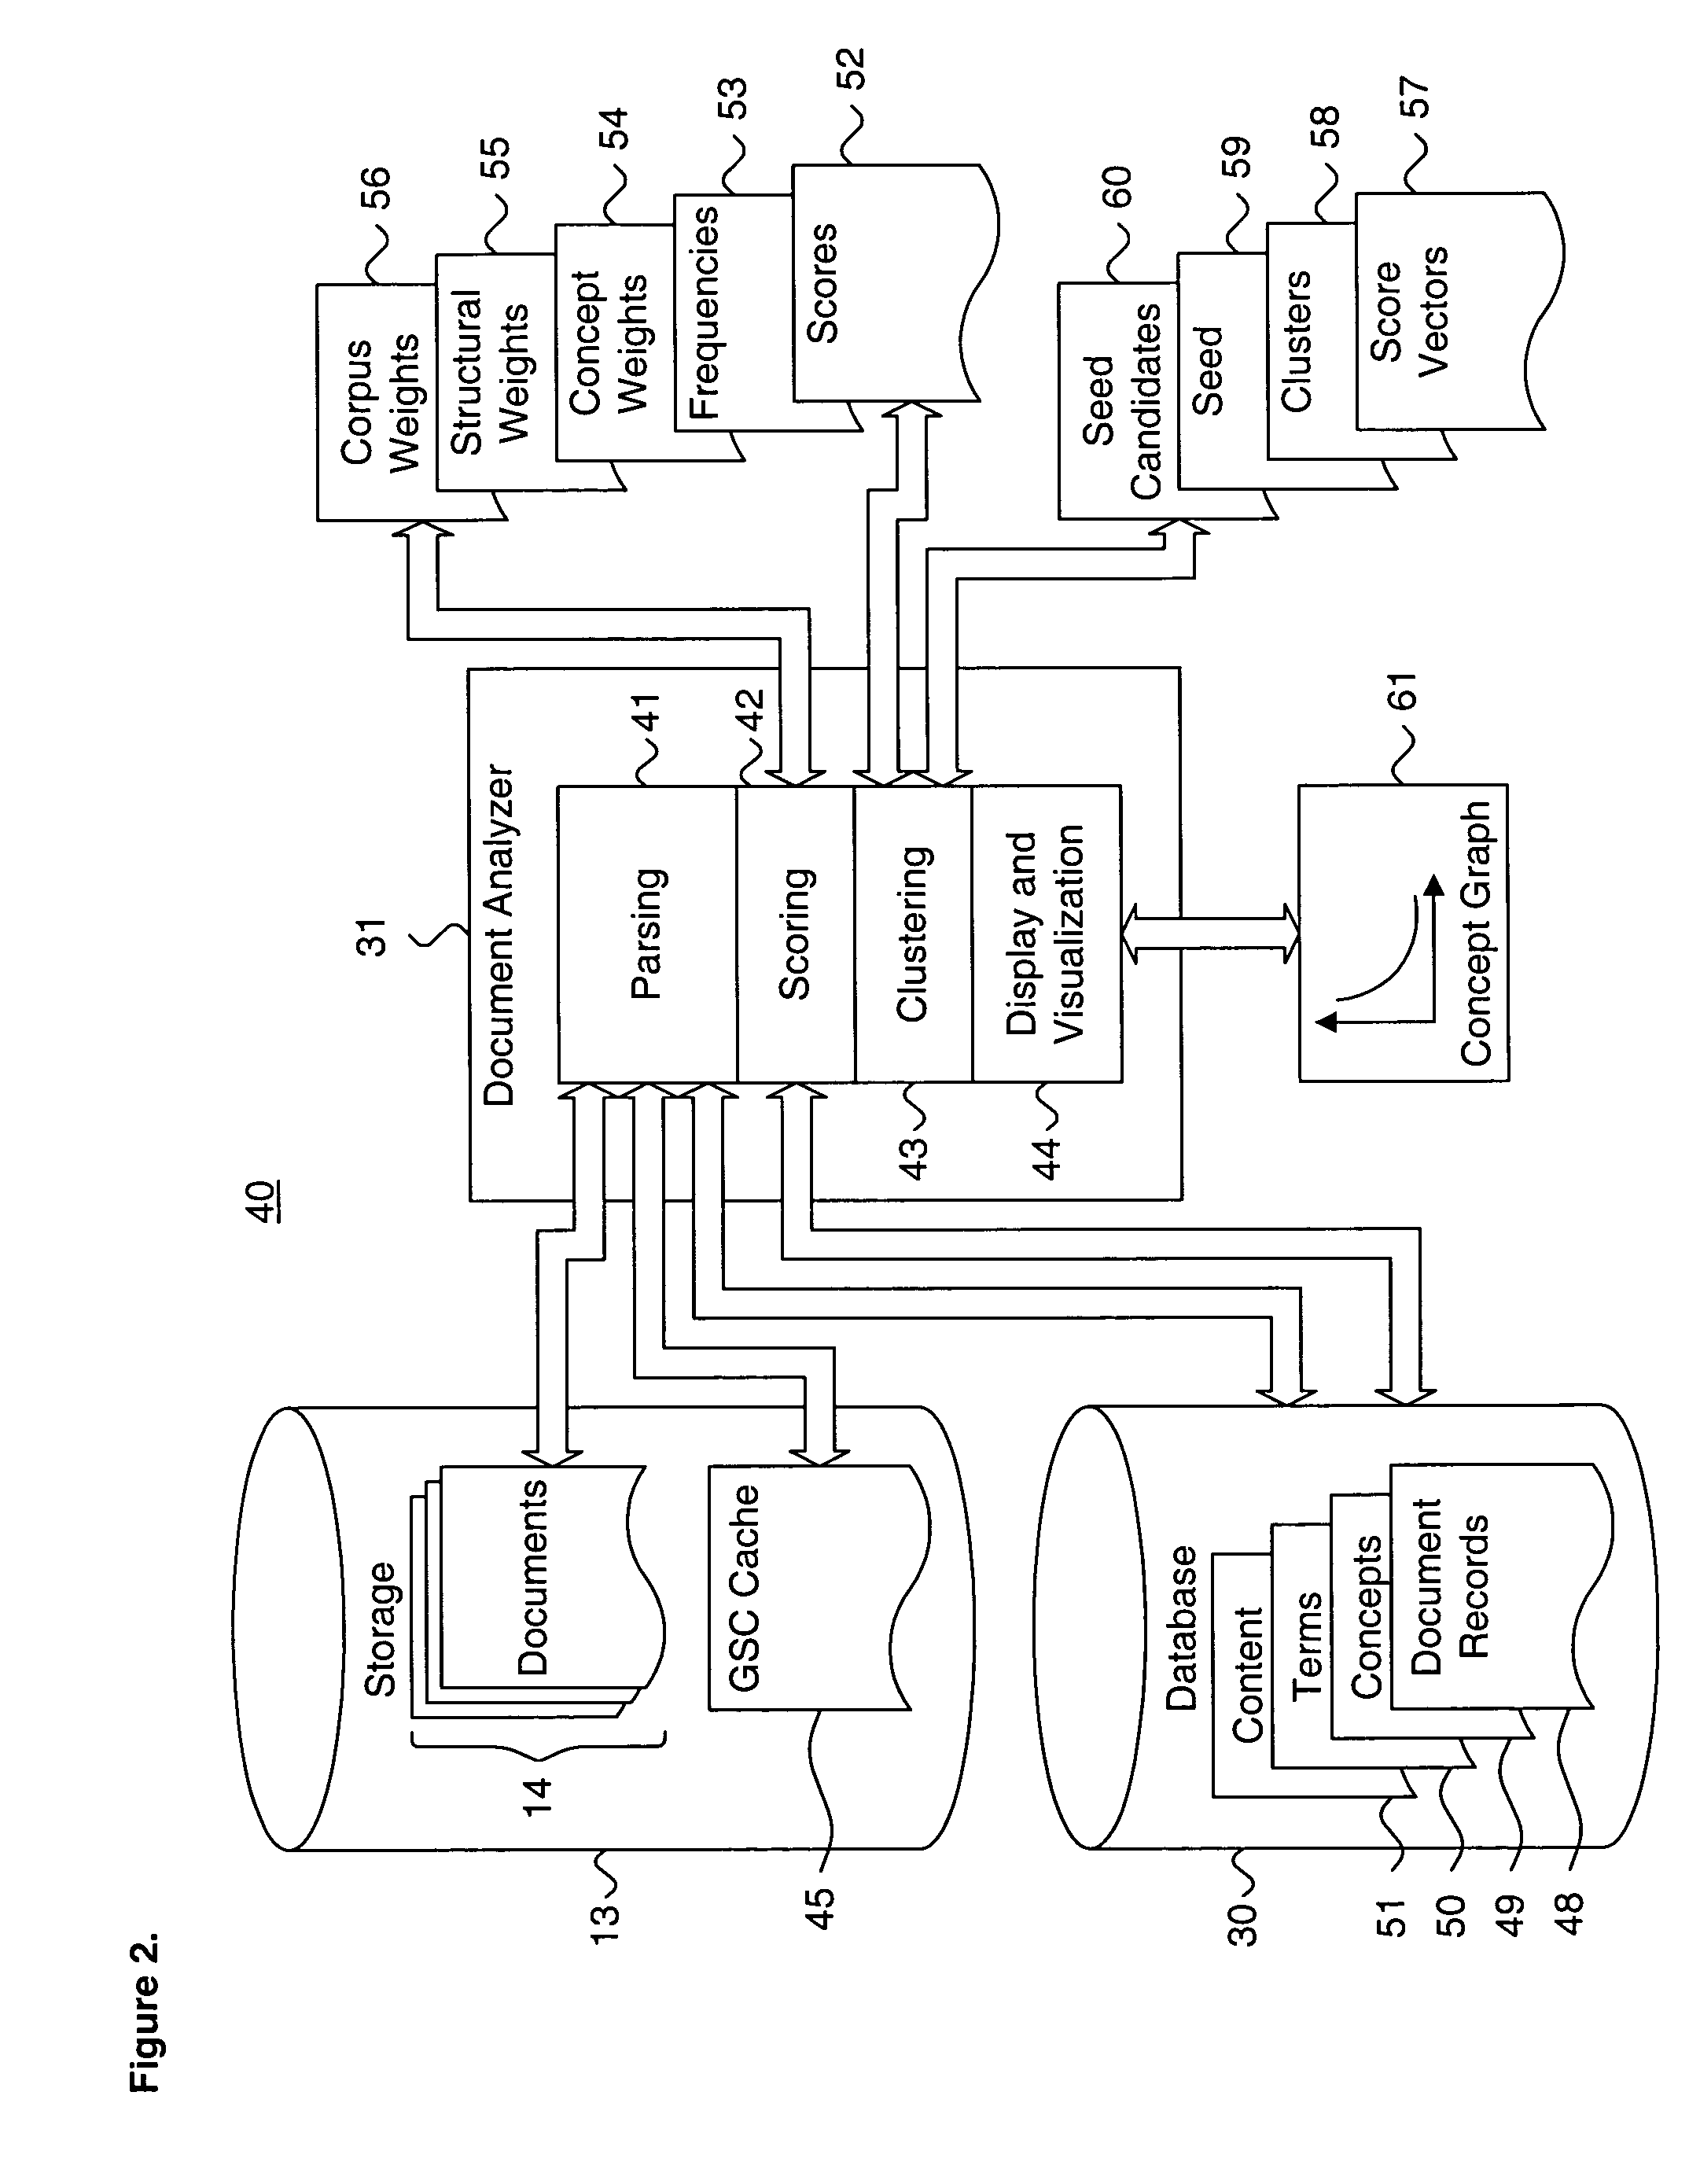 System and method for performing efficient document scoring and clustering